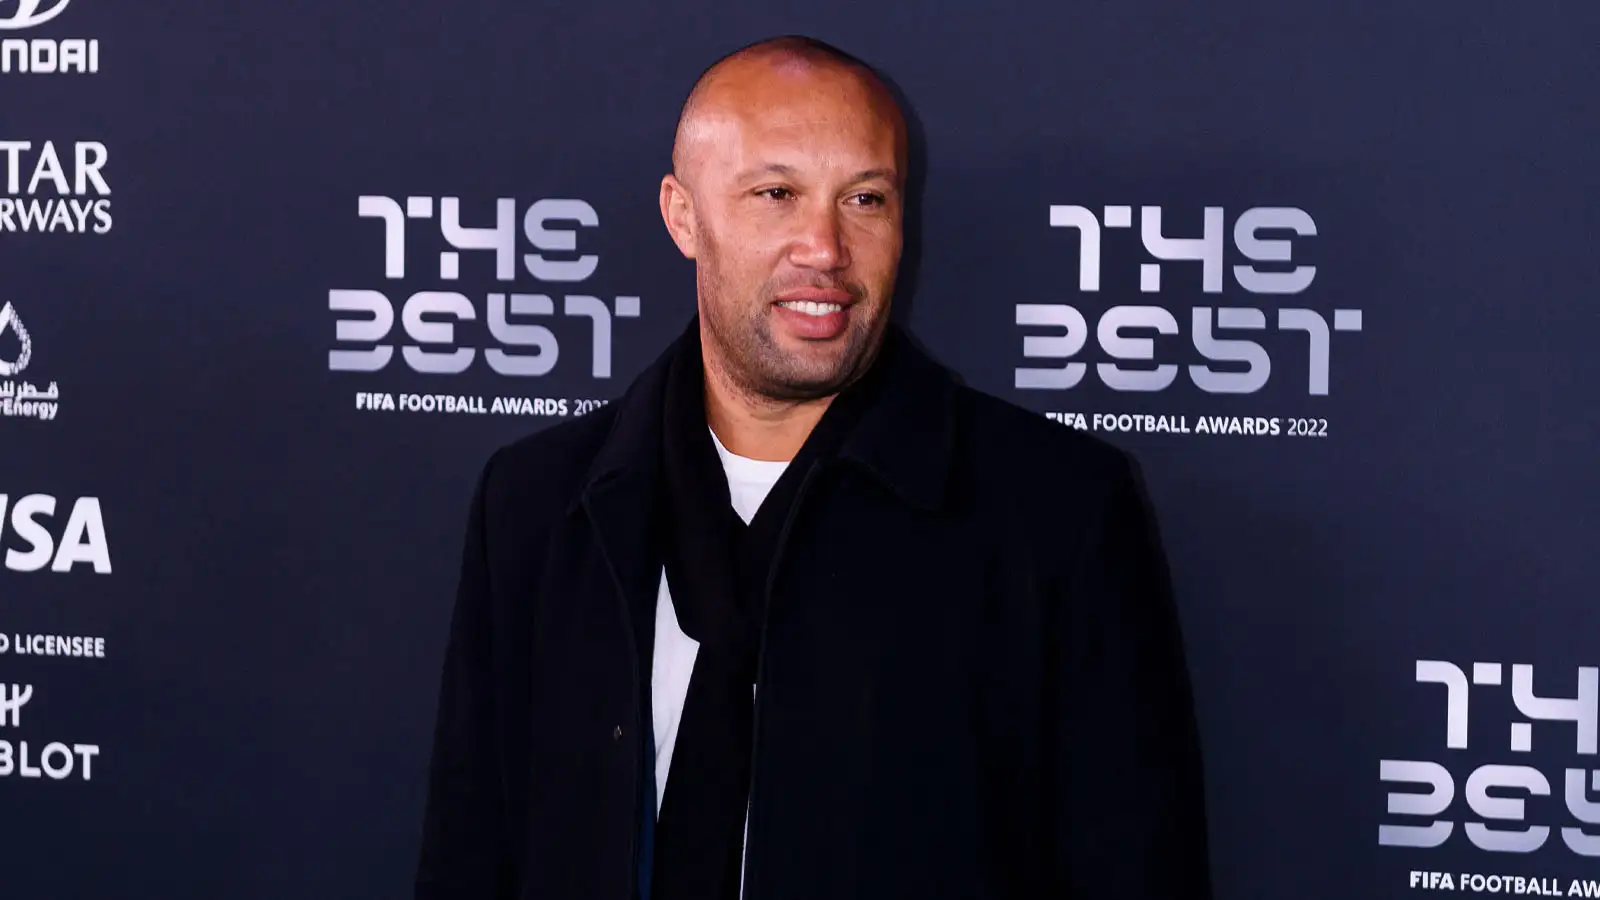 French former footballer Mikael Silvestre poses for images